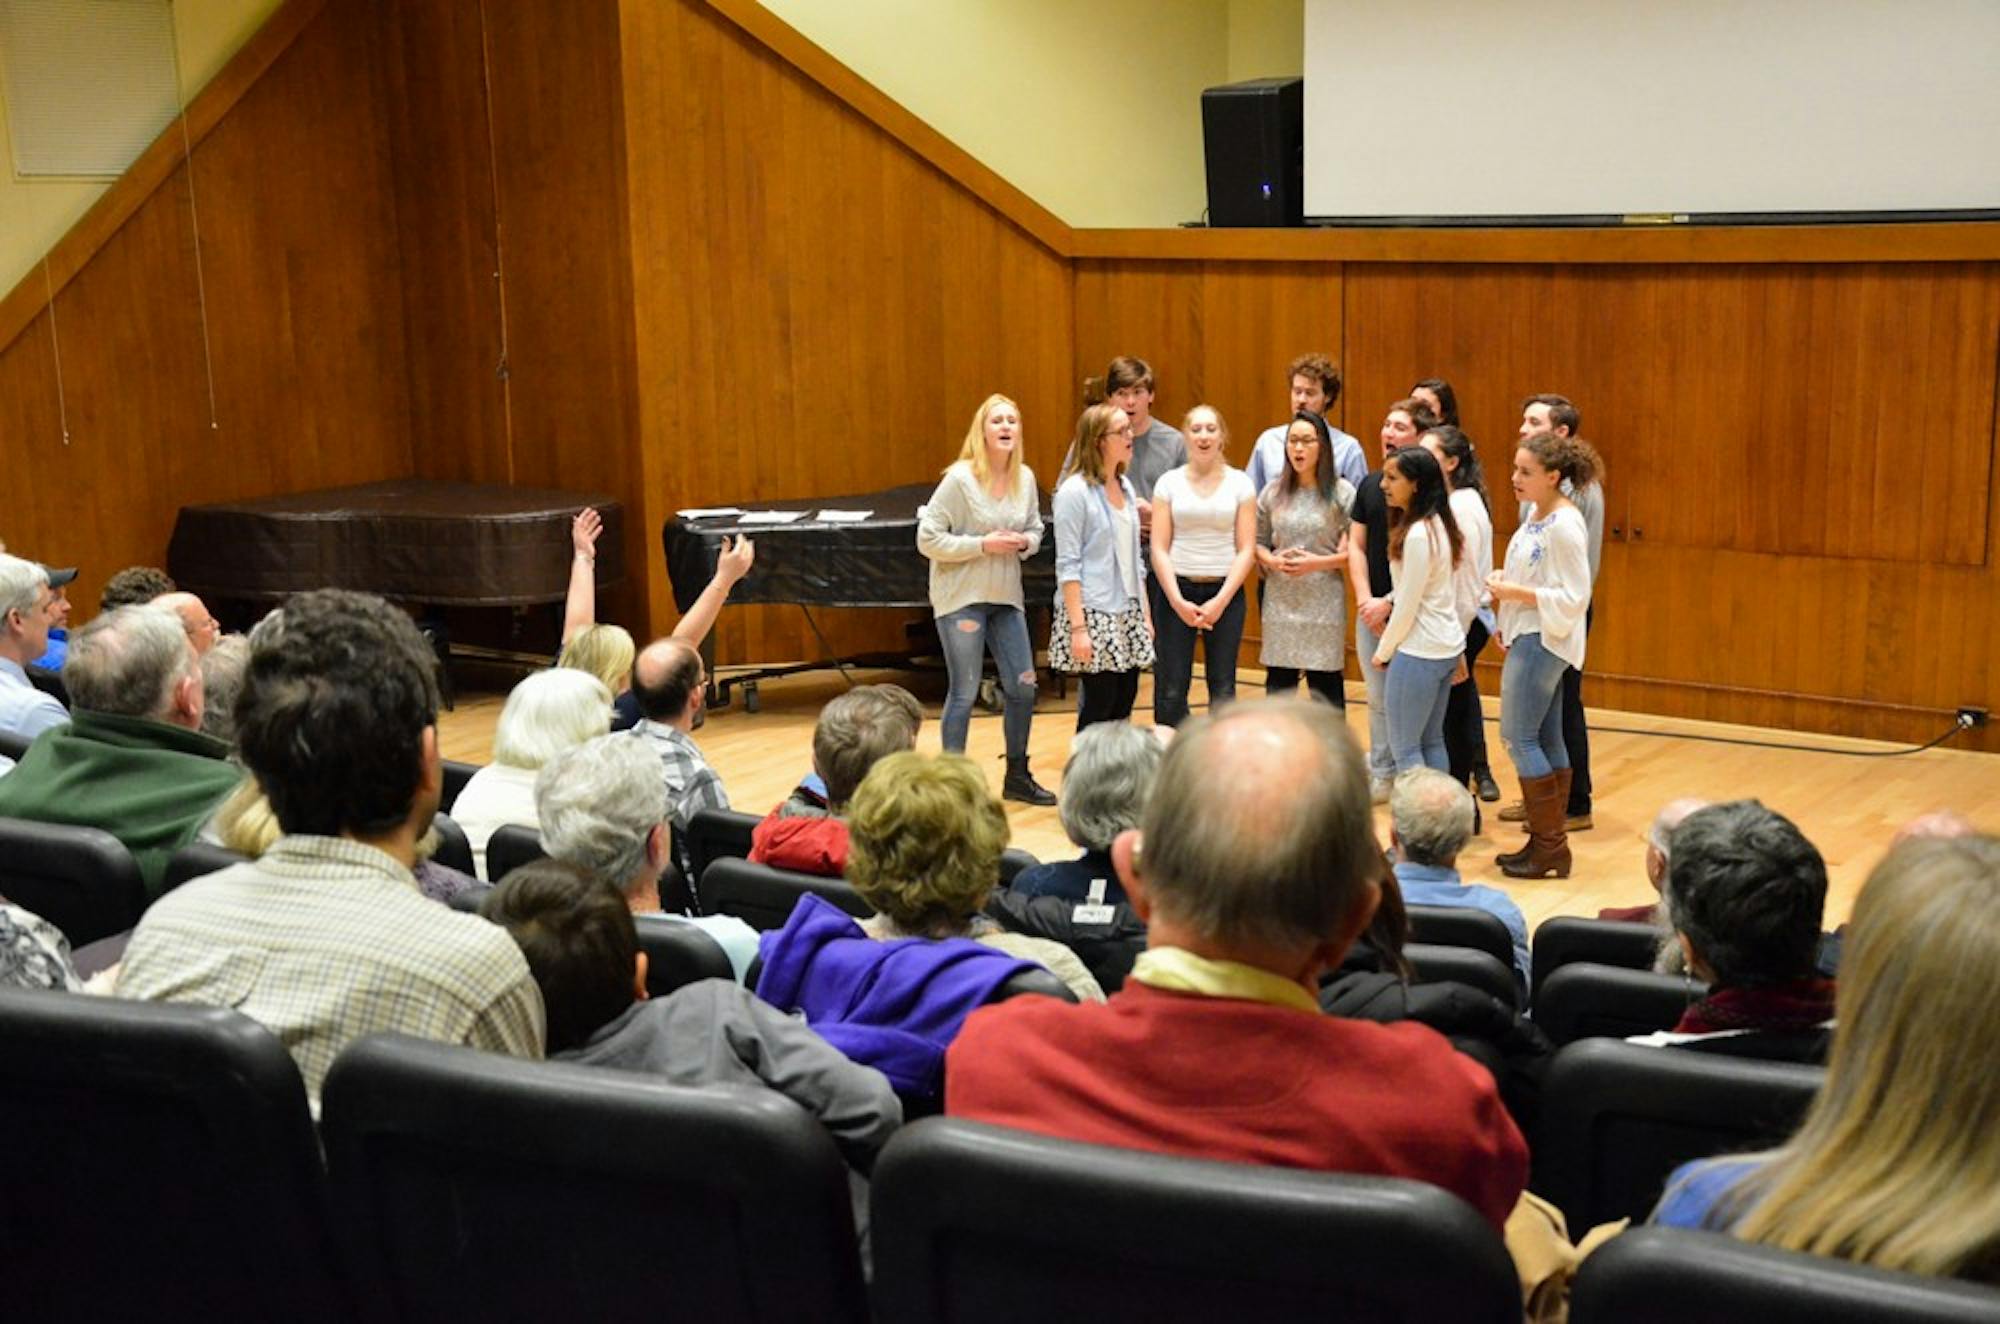 The Dartmouth Dodecaphonics perform for the Swingle singers’ master class in Faulkner Recital Hall.